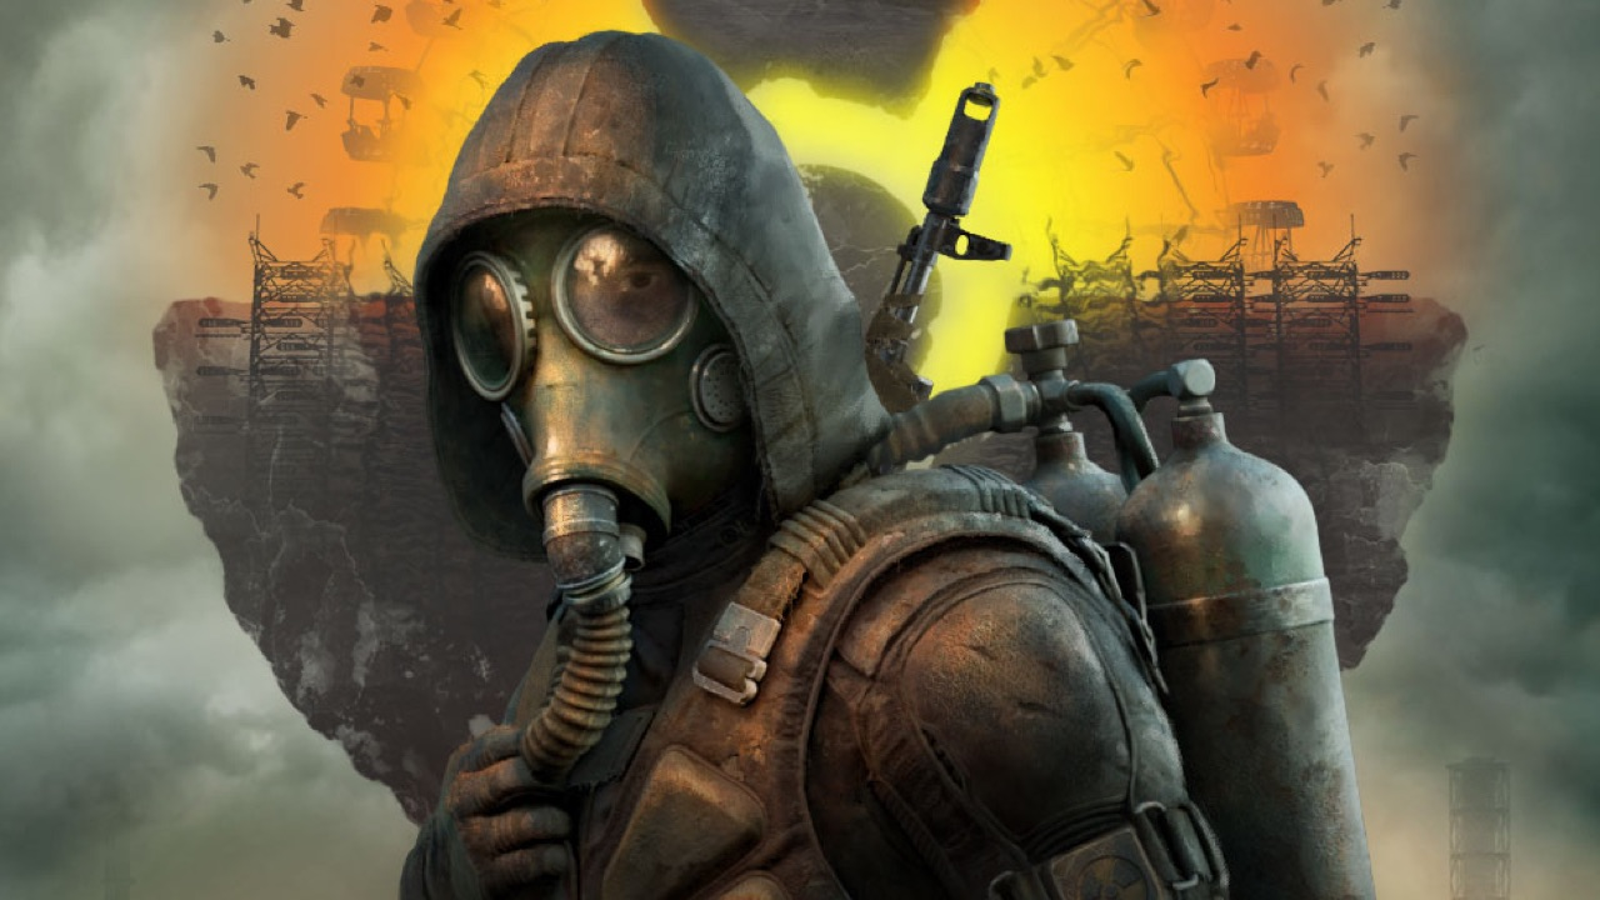 S.T.A.L.K.E.R. 2: Heart of Chornobyl new trailer released: Video